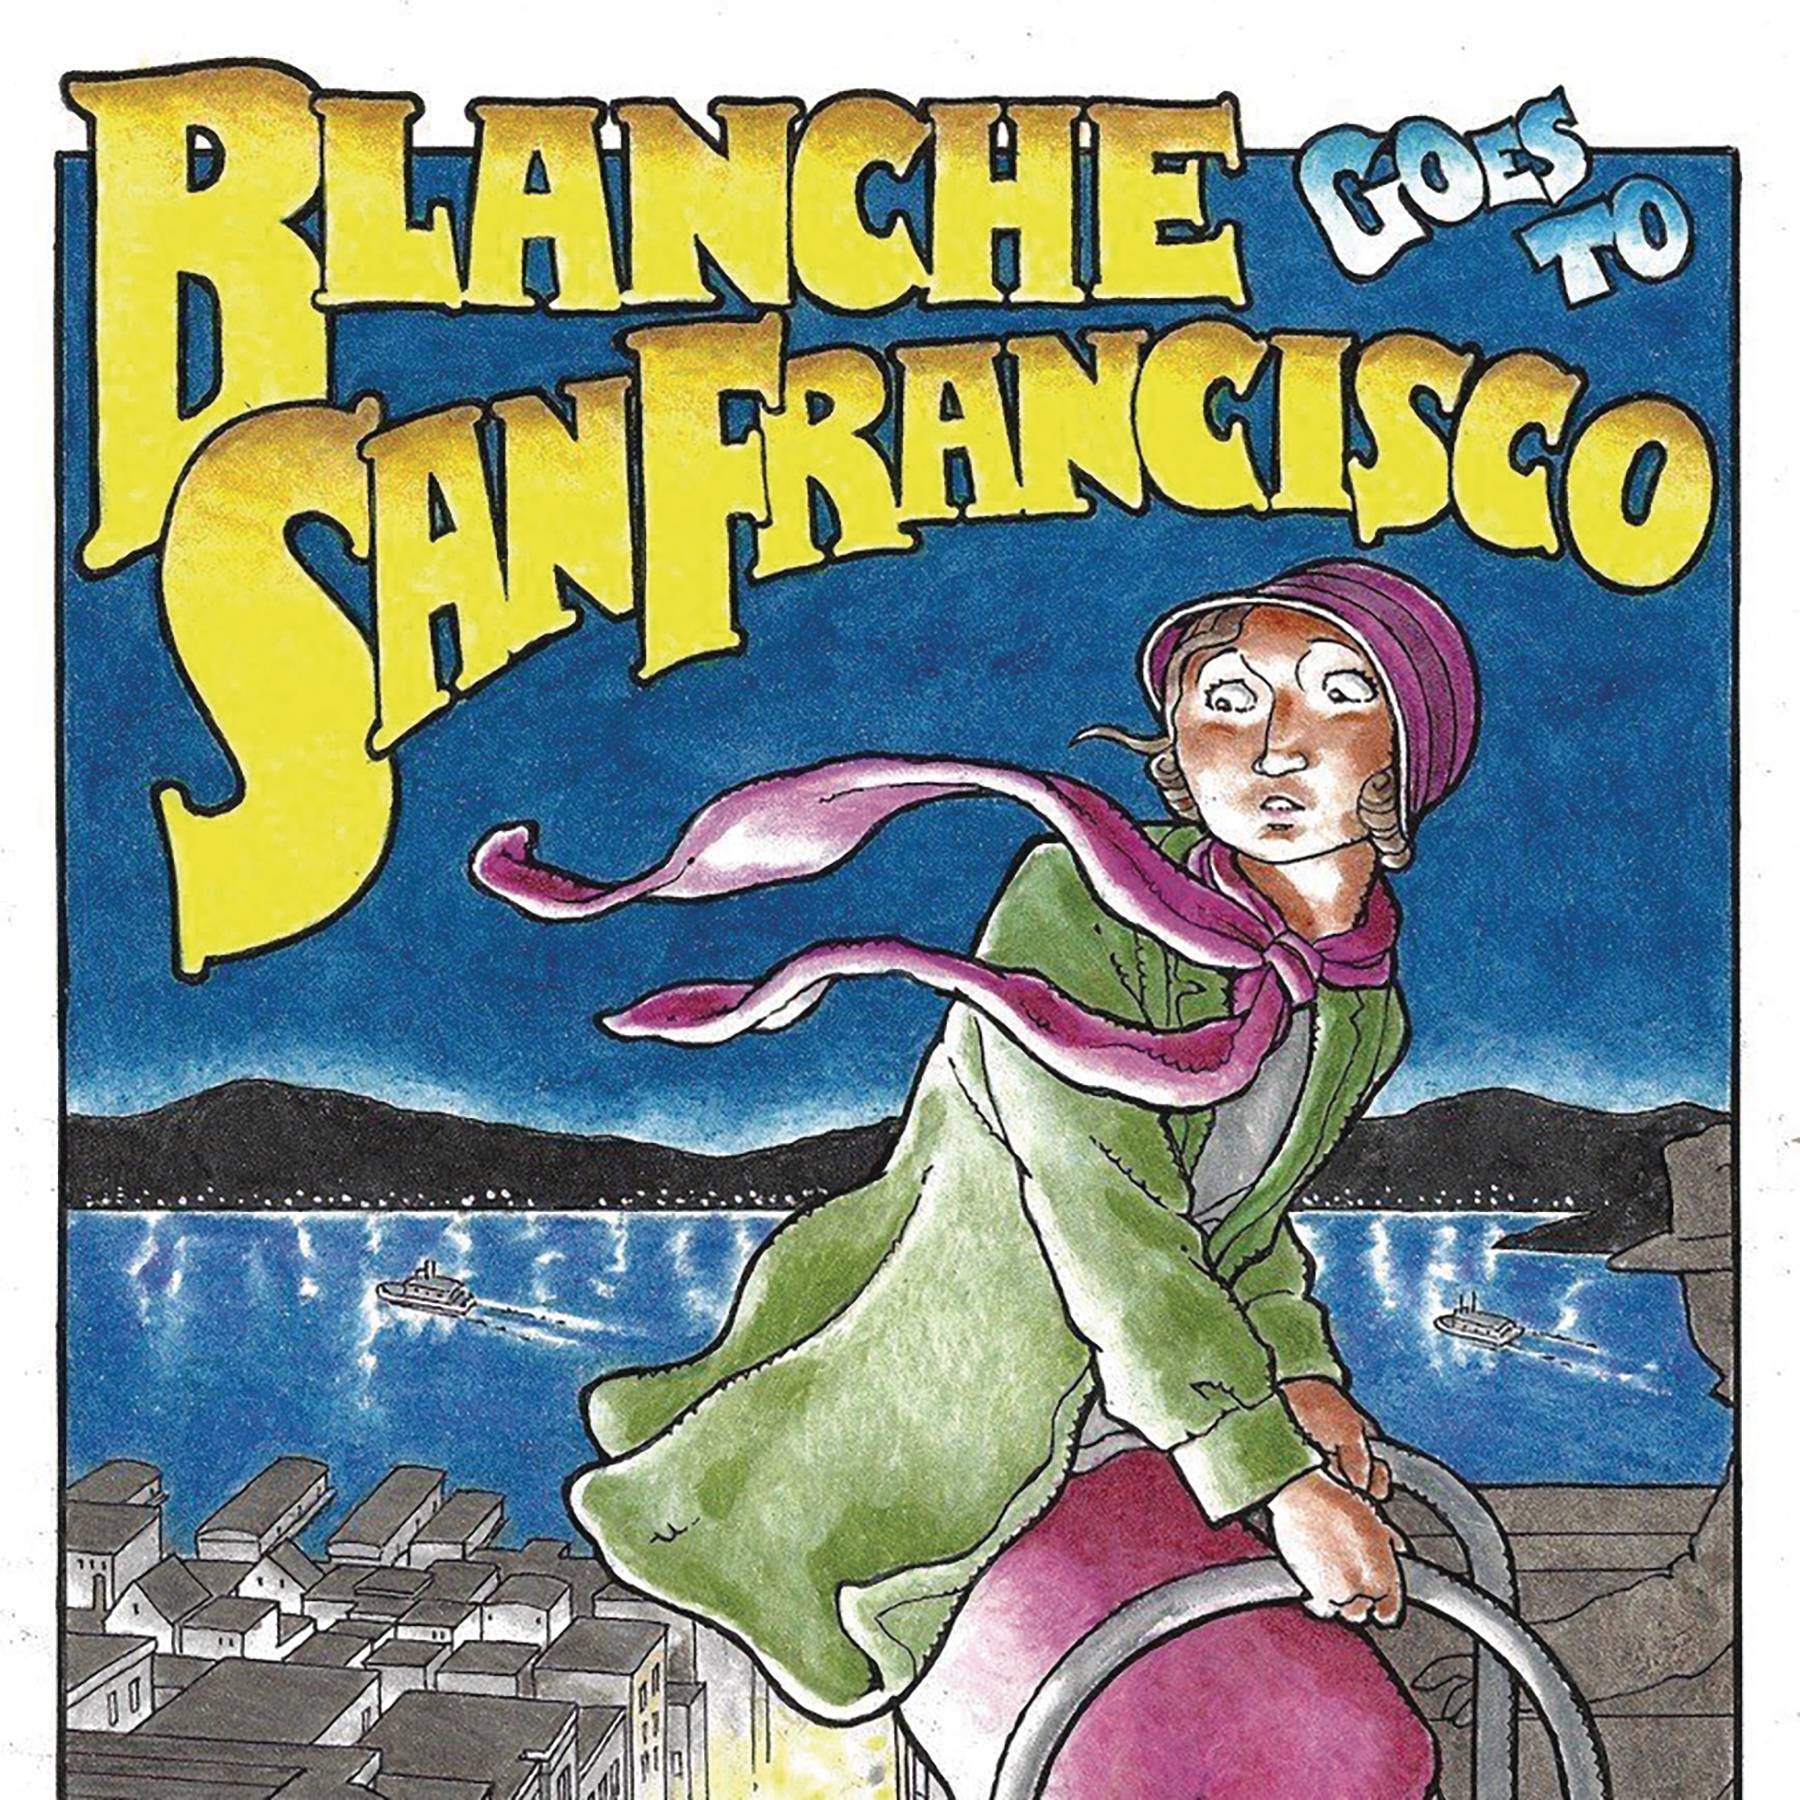 BLANCHE GOES TO SAN FRANCISCO